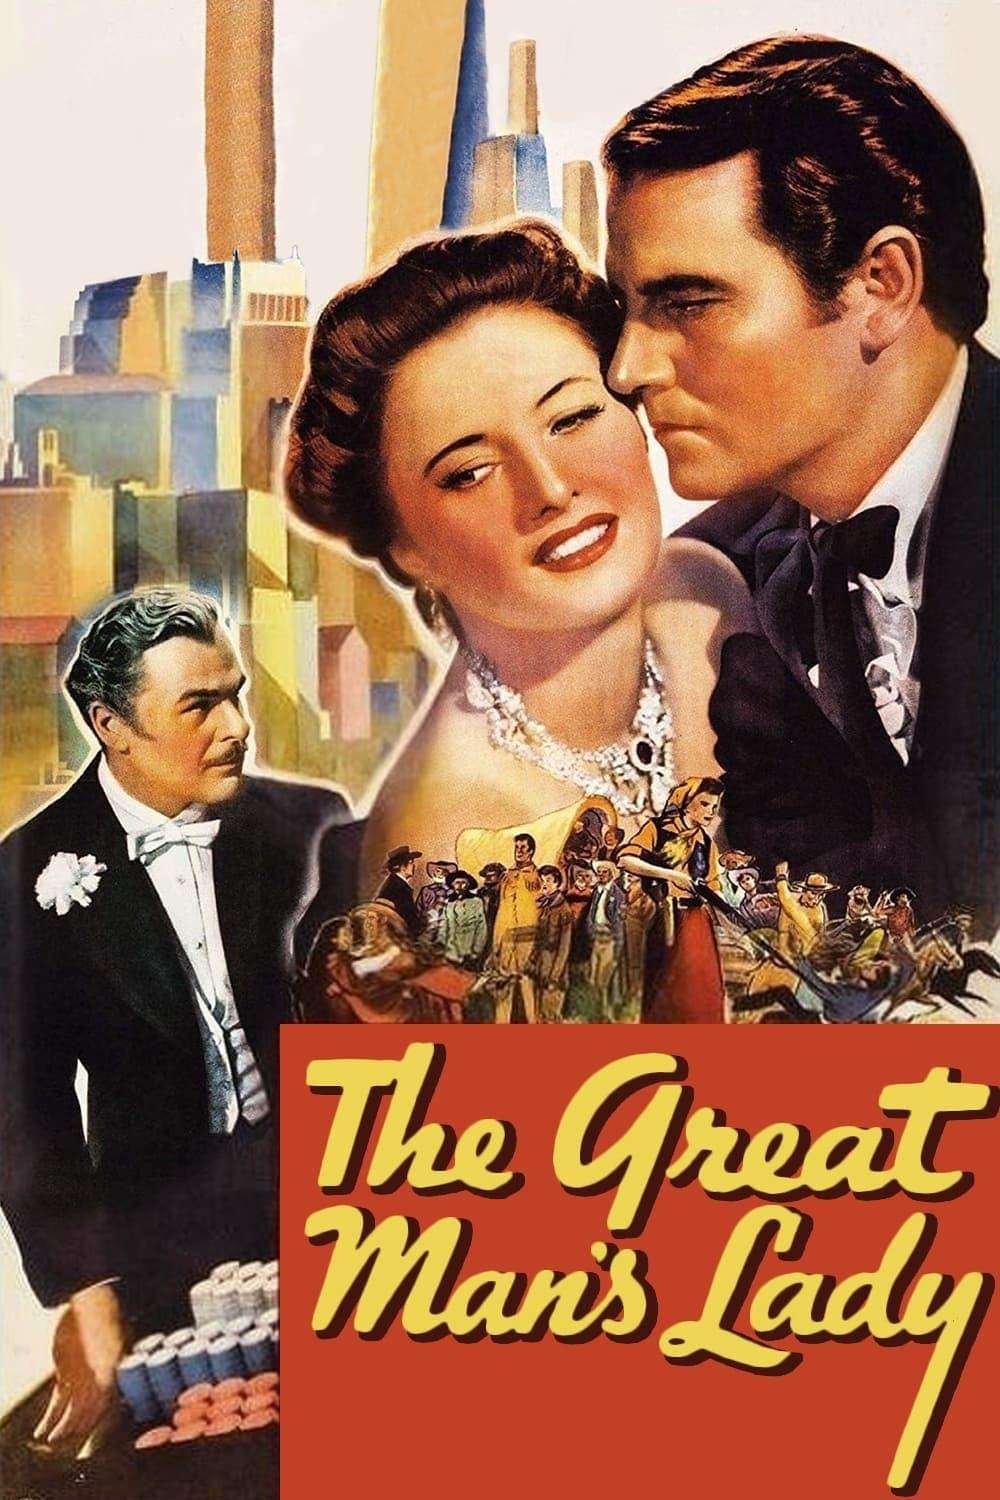 The Great Man's Lady poster